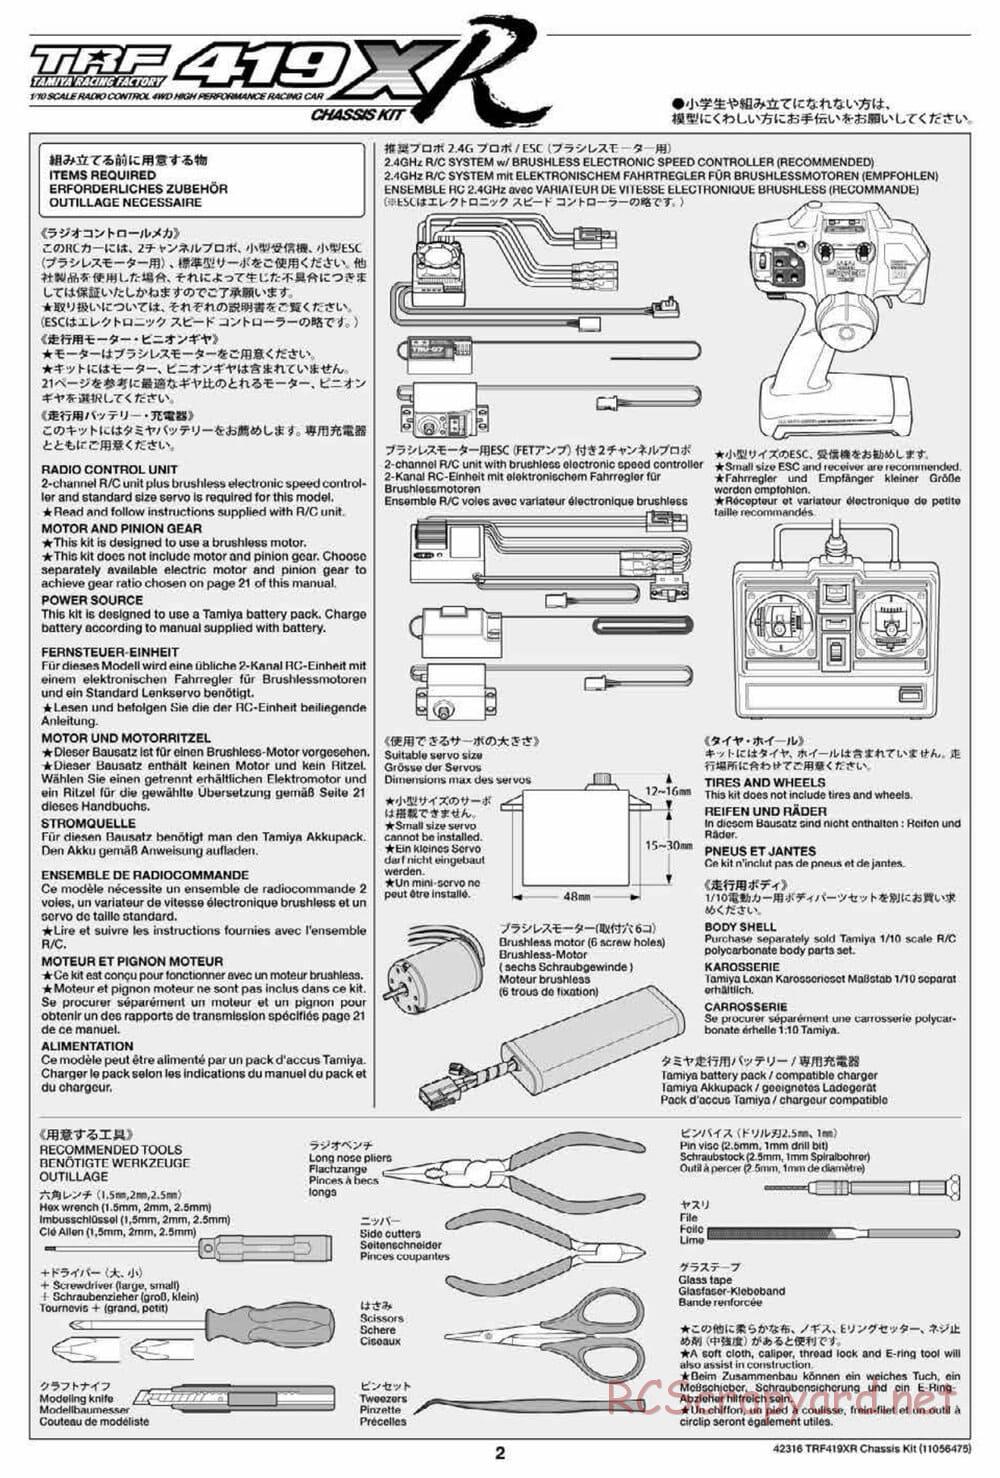 Tamiya - TRF419XR Chassis - Manual - Page 2